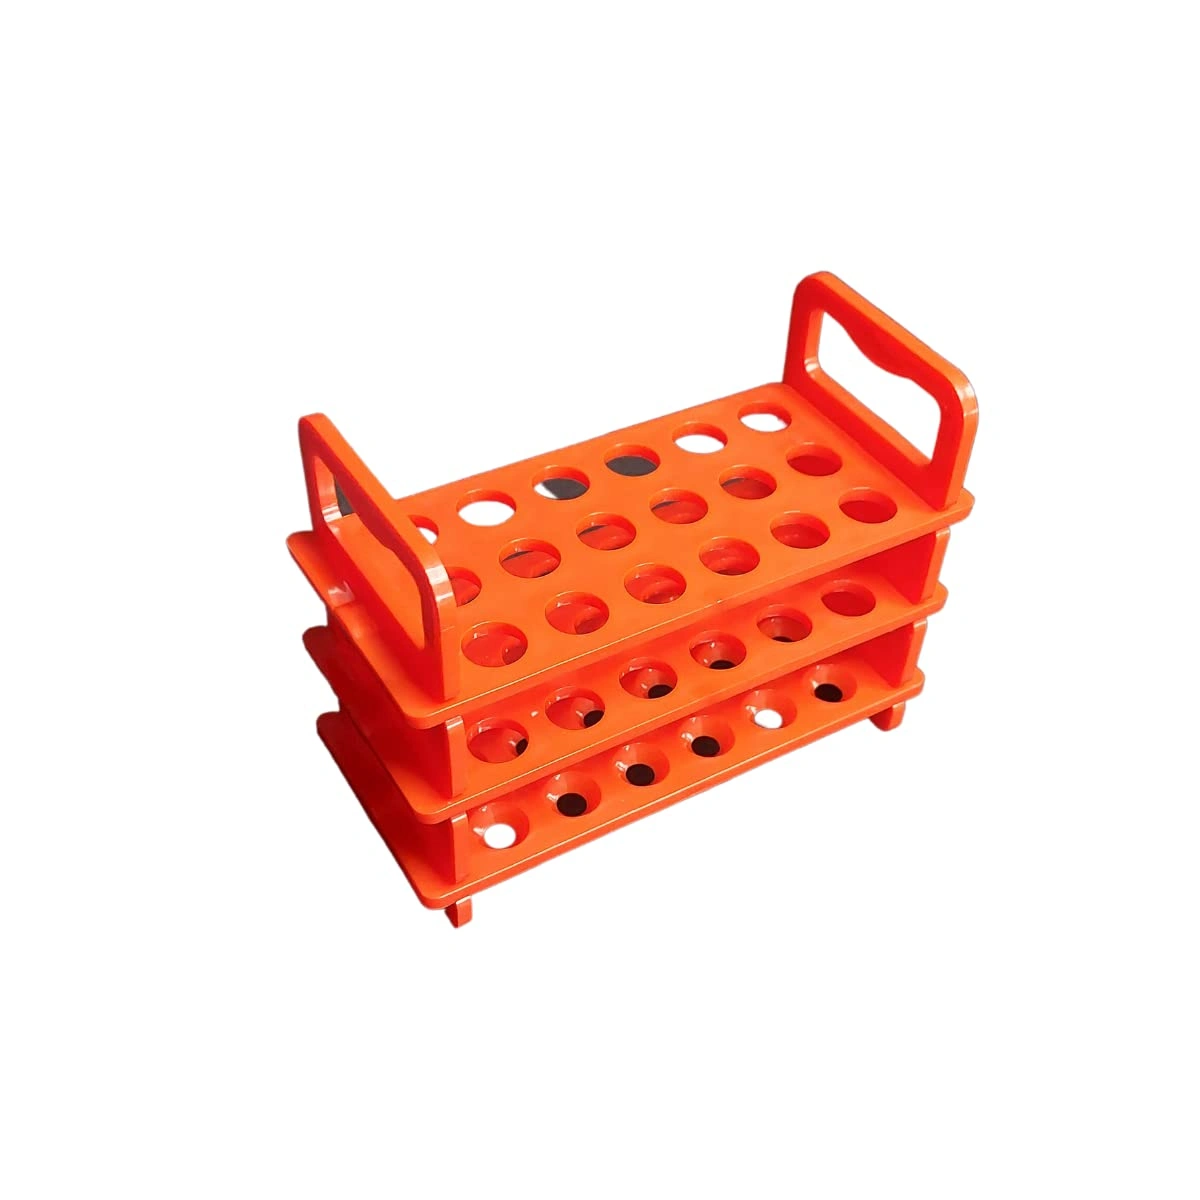 Test tube stand 3 TIER: 13mm × 18 Holes (Pack of 1)-11481924